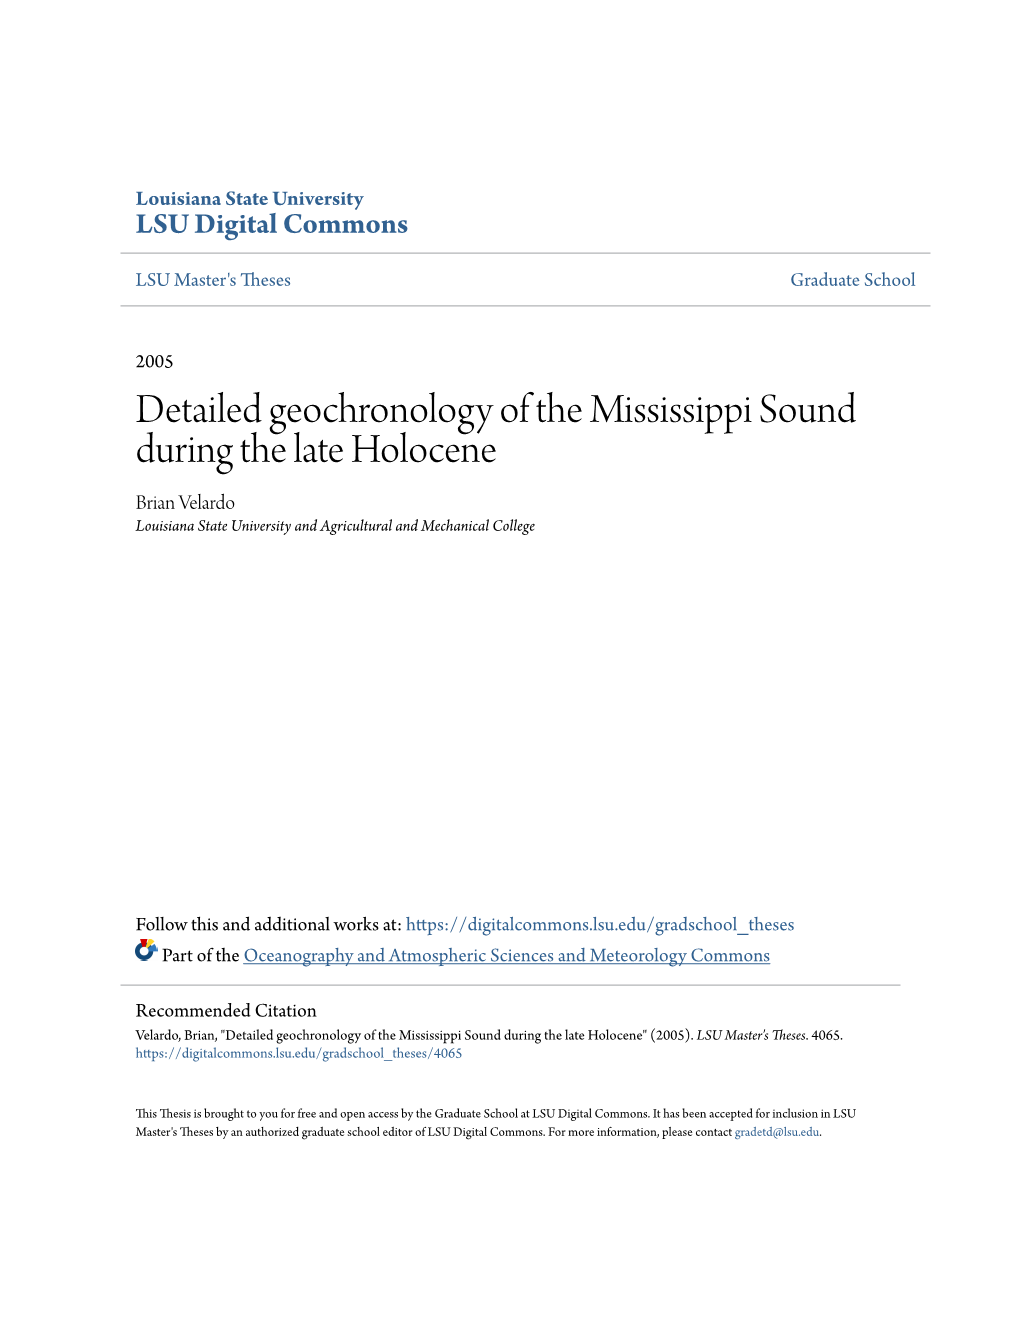 Detailed Geochronology of the Mississippi Sound During the Late Holocene Brian Velardo Louisiana State University and Agricultural and Mechanical College